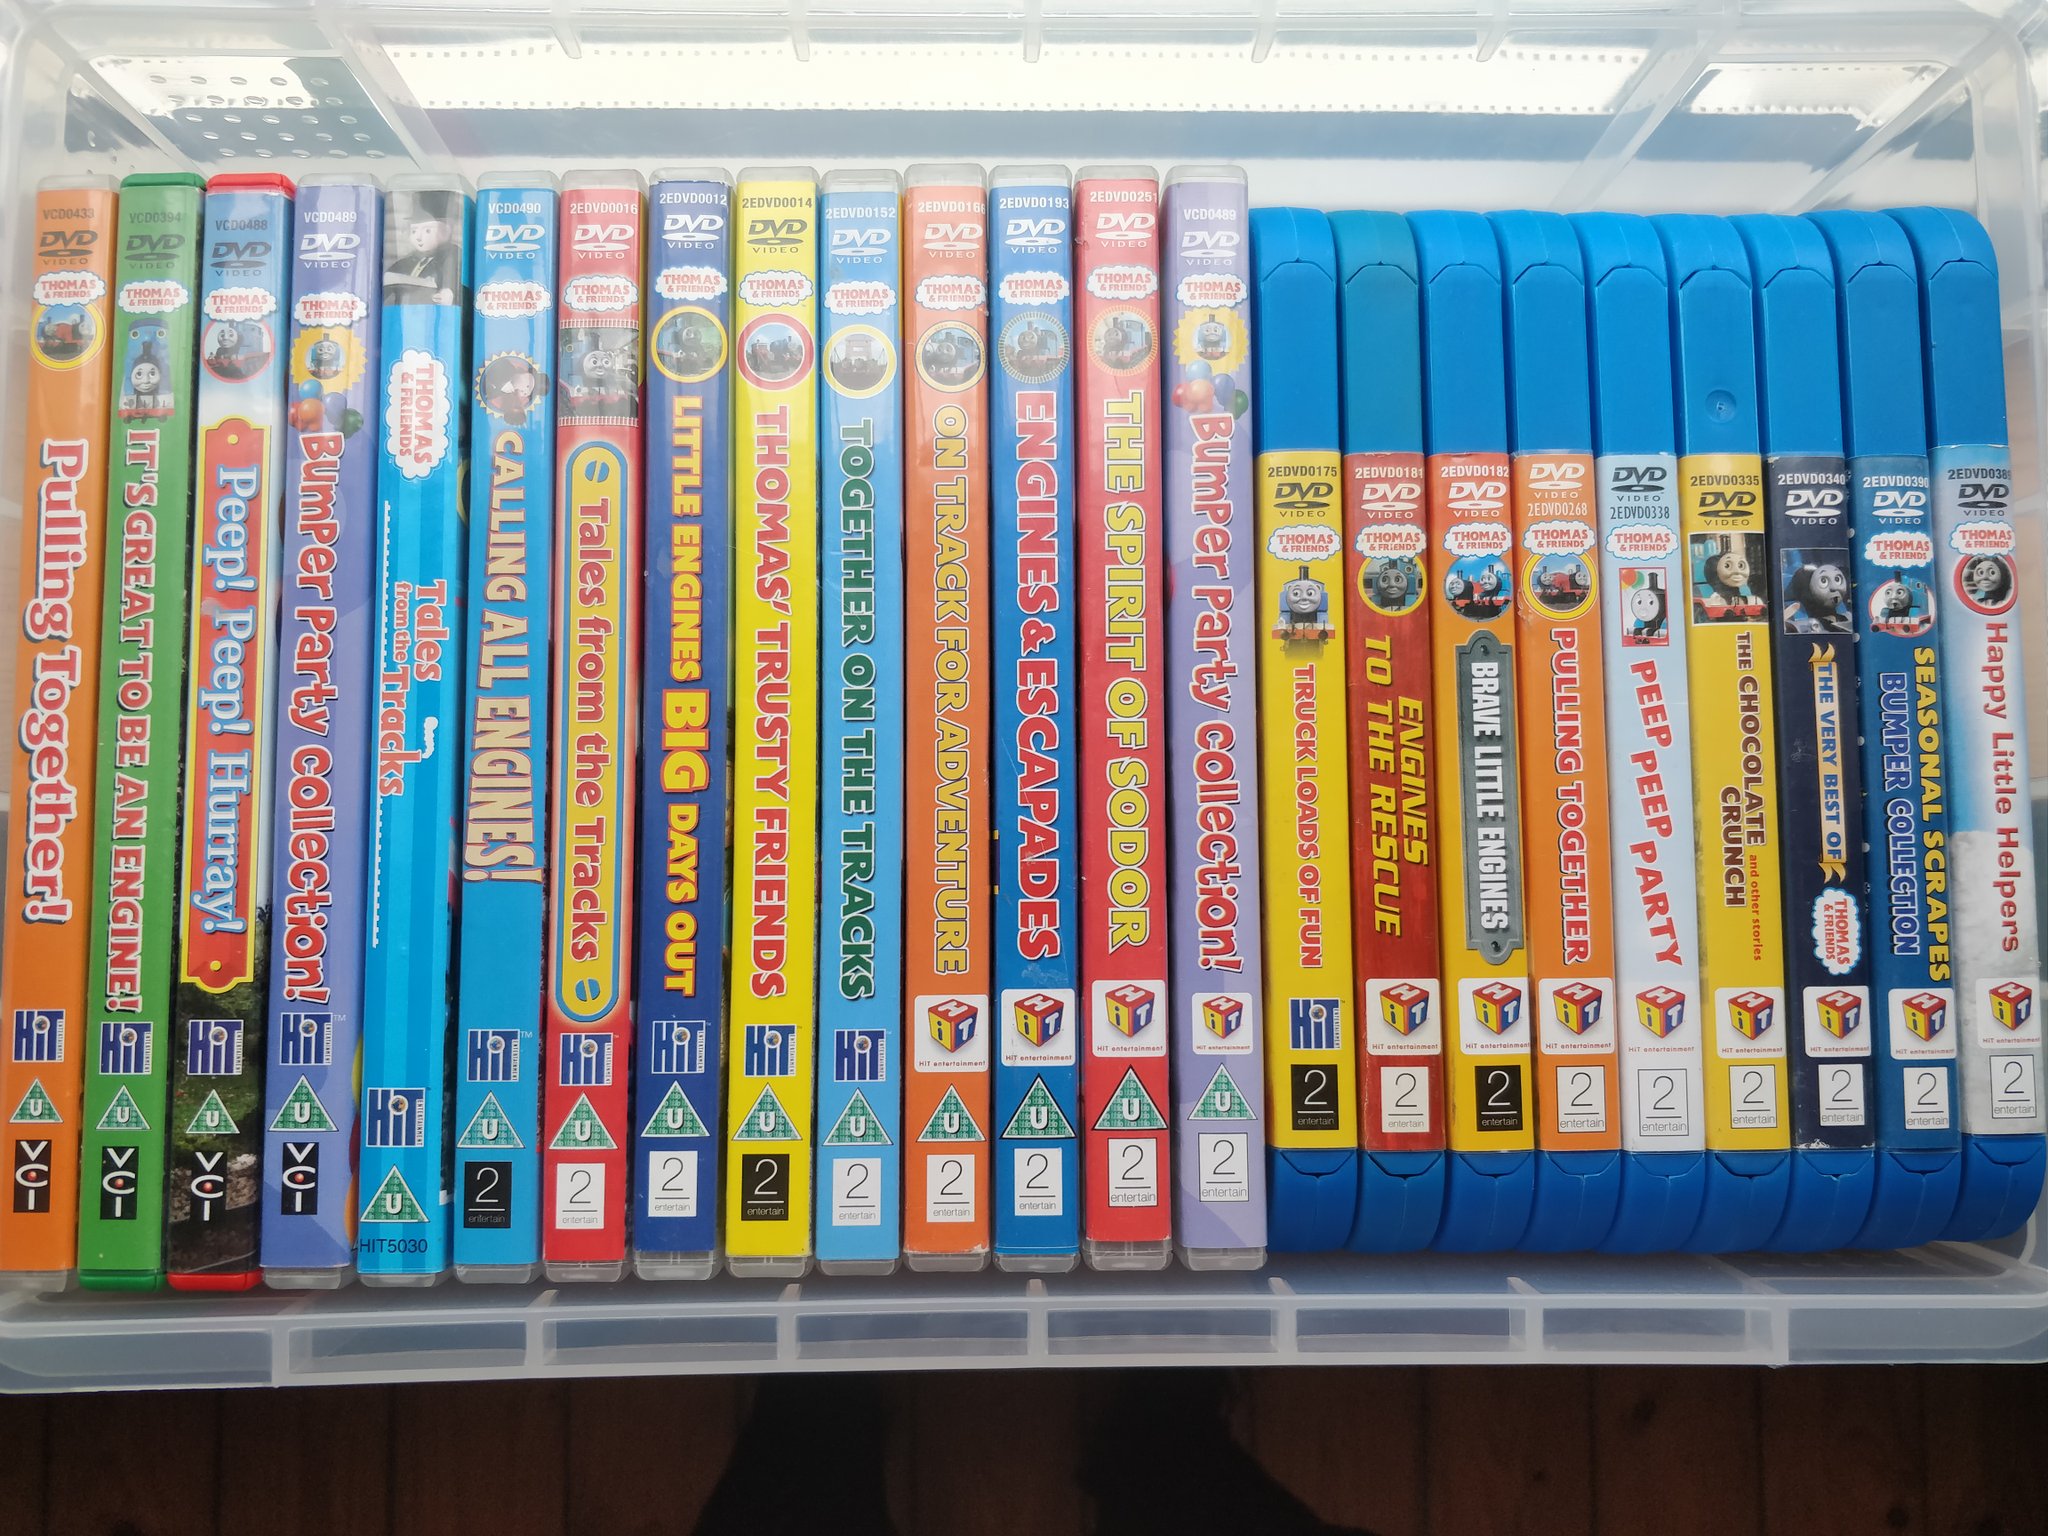 digestión congelador corriente Oisín on Twitter: "Although it does mean I have all the non-HiT  Entertainment/Mattel Creations DVDs https://t.co/XuXe95AeWN" / Twitter